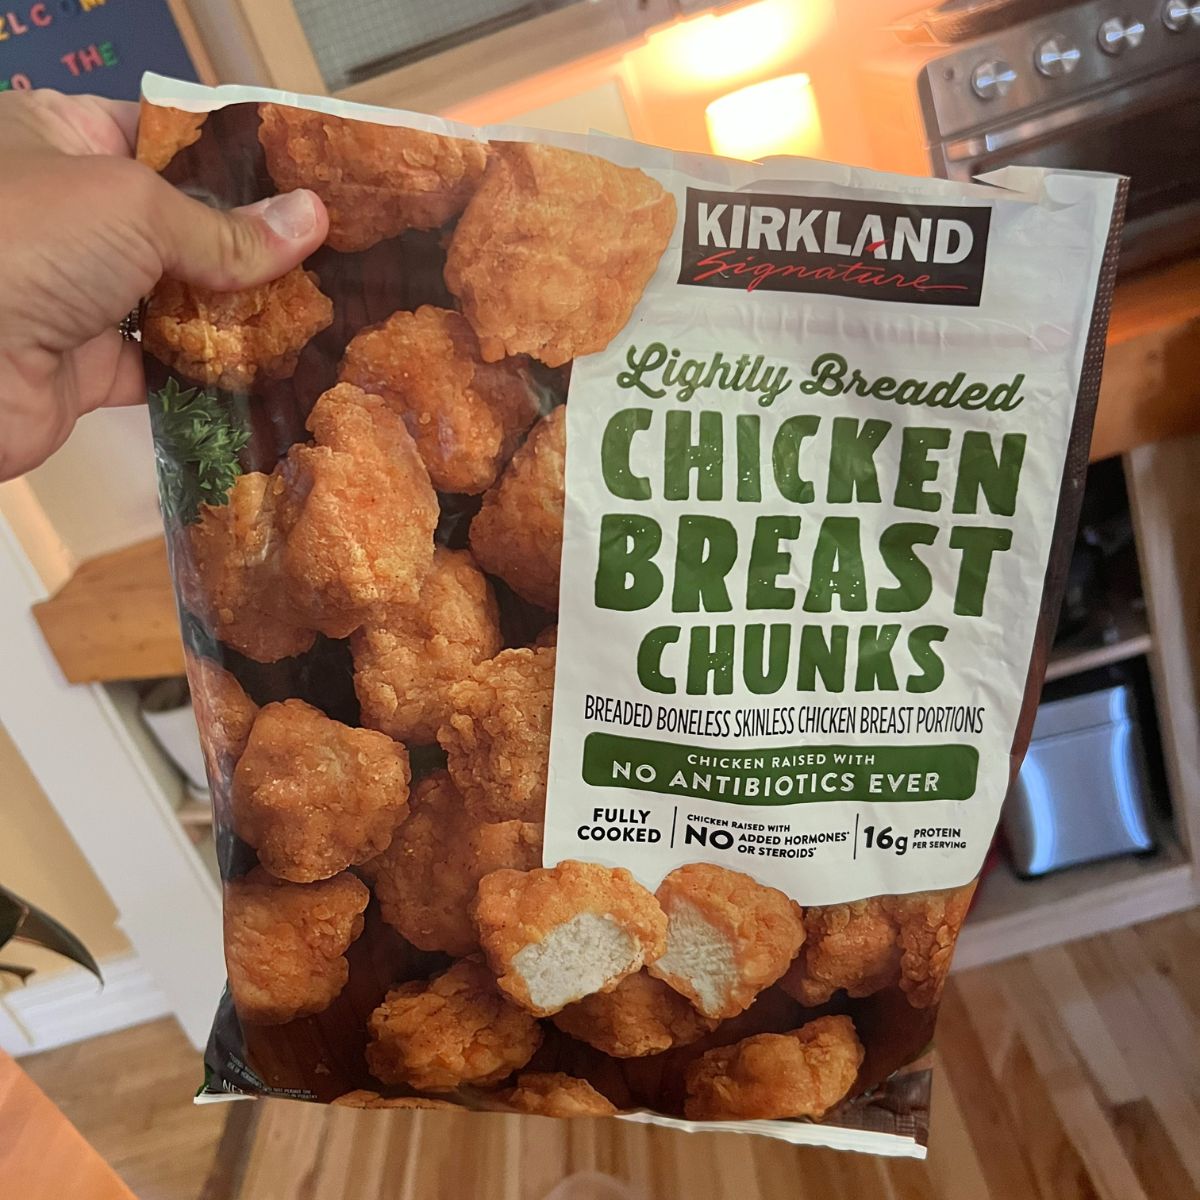 Bag of Kirkland Chicken Breast Chunks available in the freezer aisle.